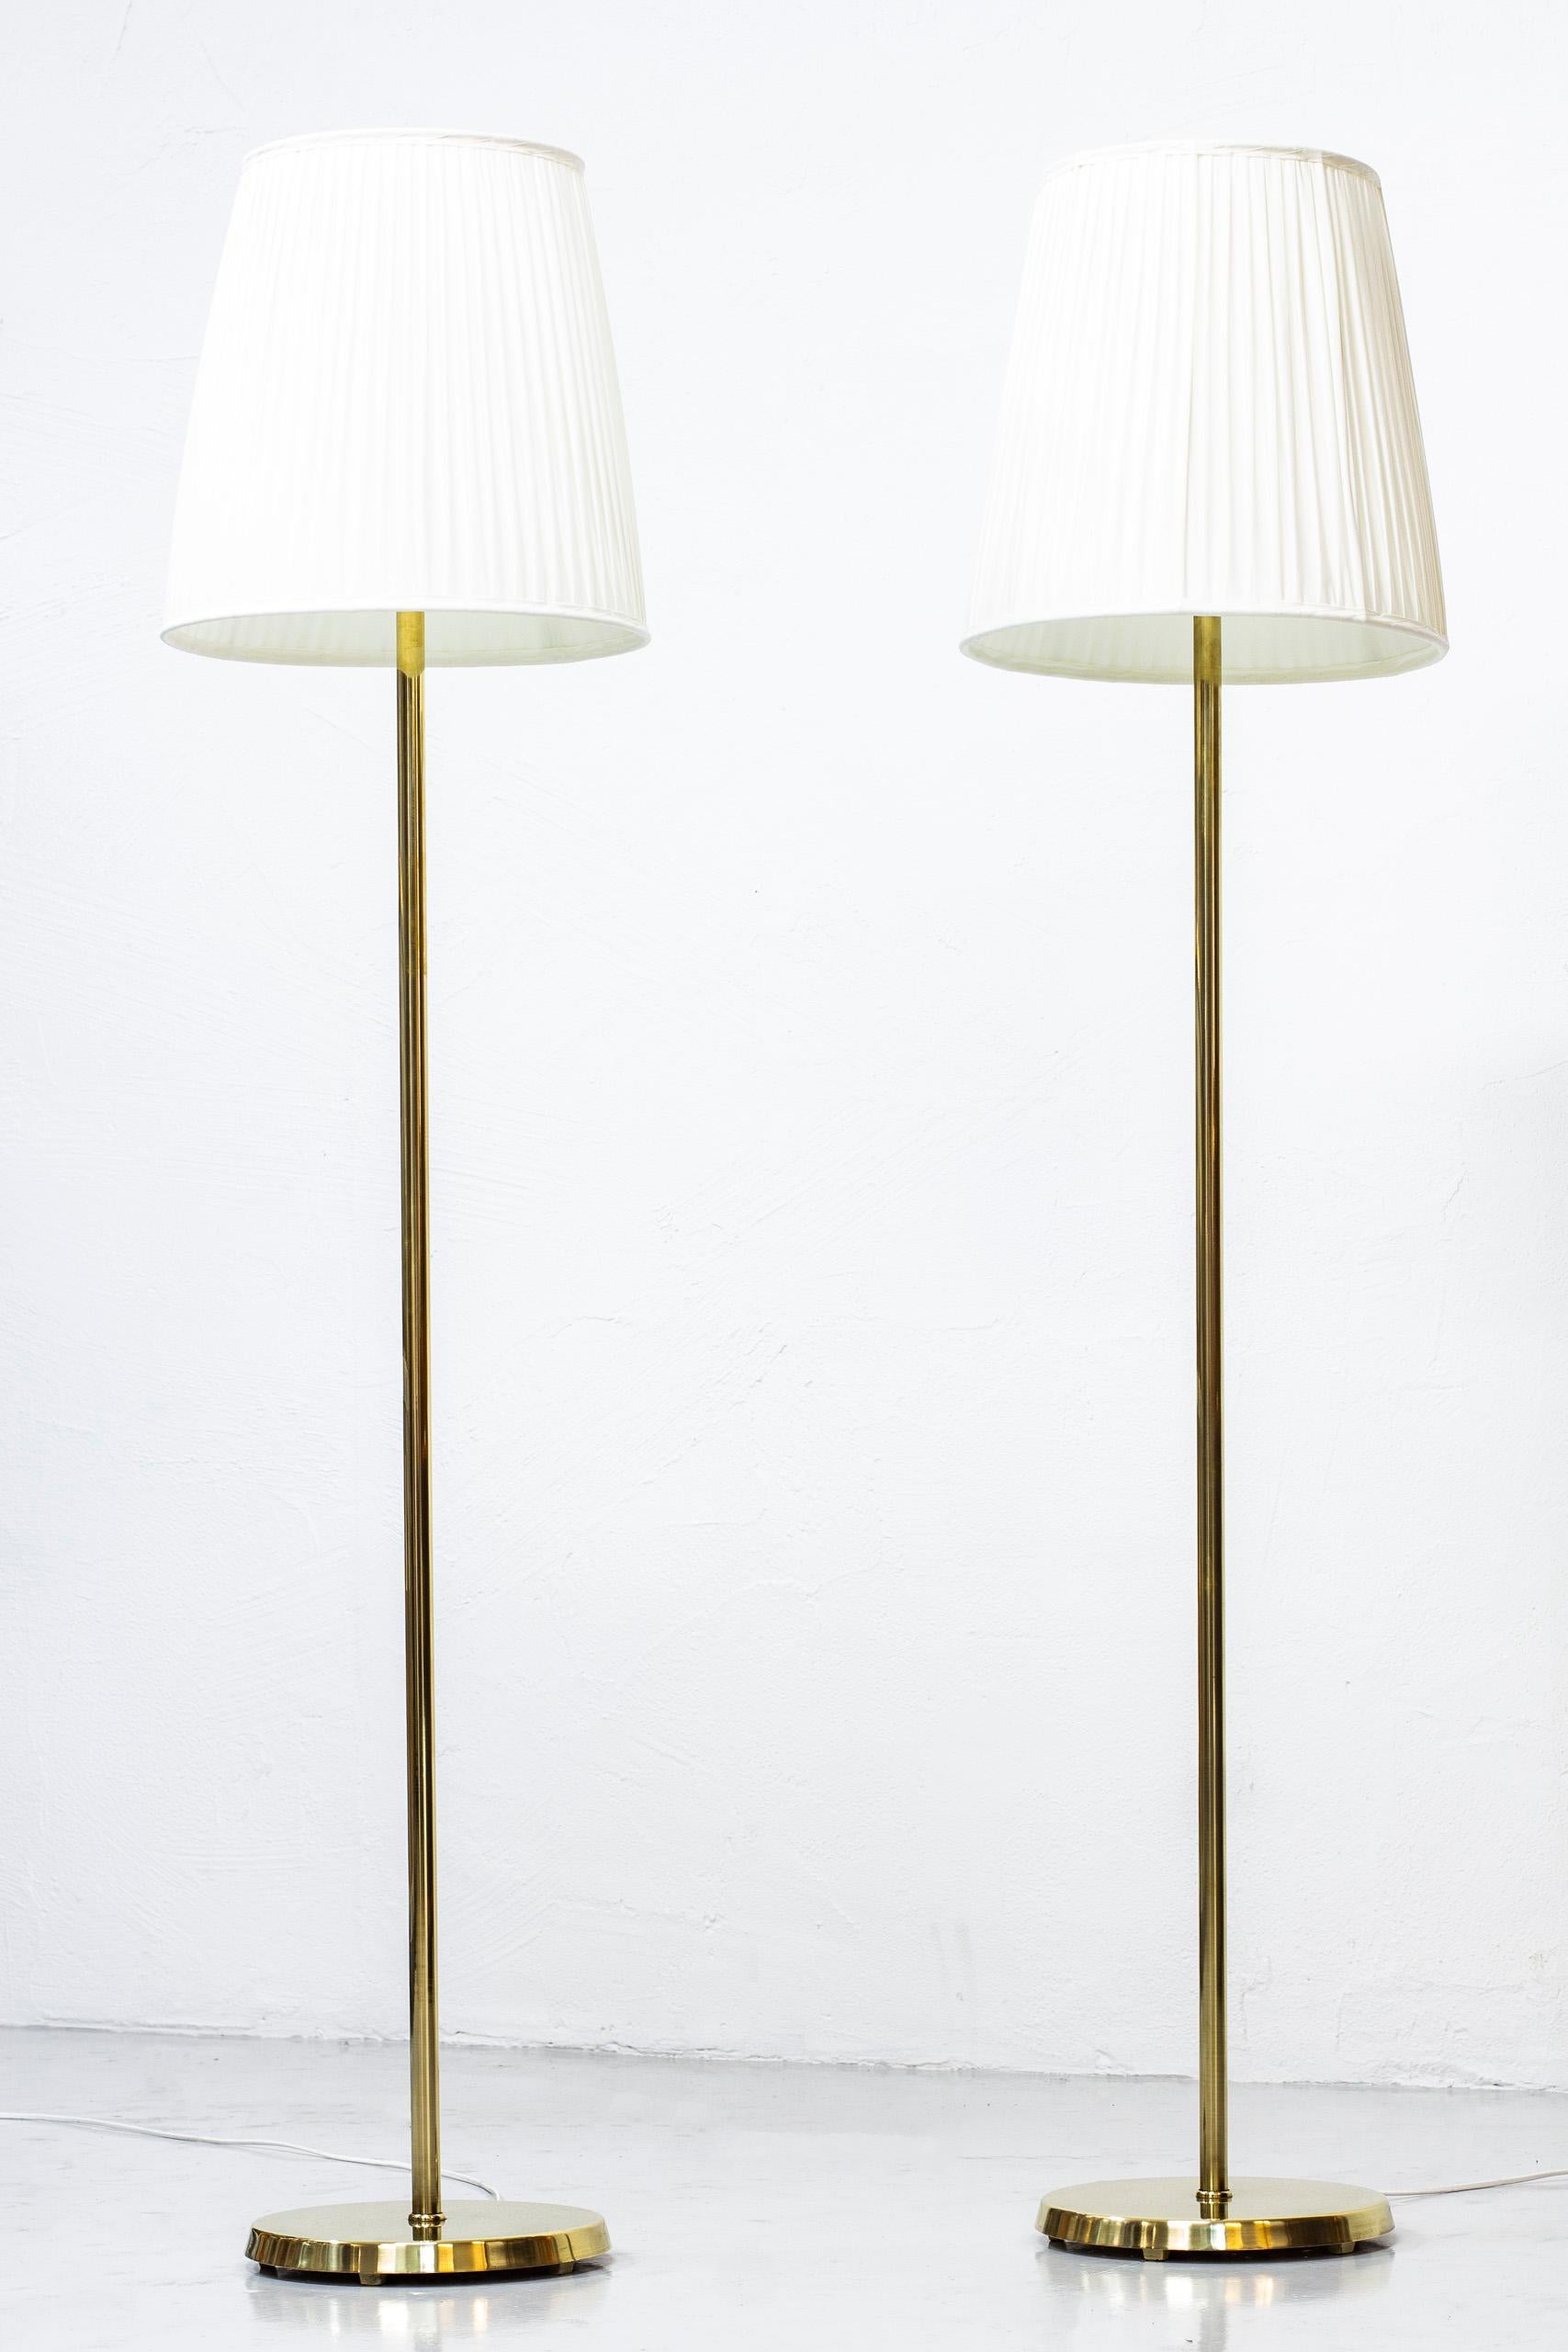 Pair of floor lamps produced in Sweden by ASEA Belysning during the 1950s. Made from solid polished brass, with opaline inner glass and chintz fabric shades. Light switch on the lamp fixture in working order. Very good vintage condition with light